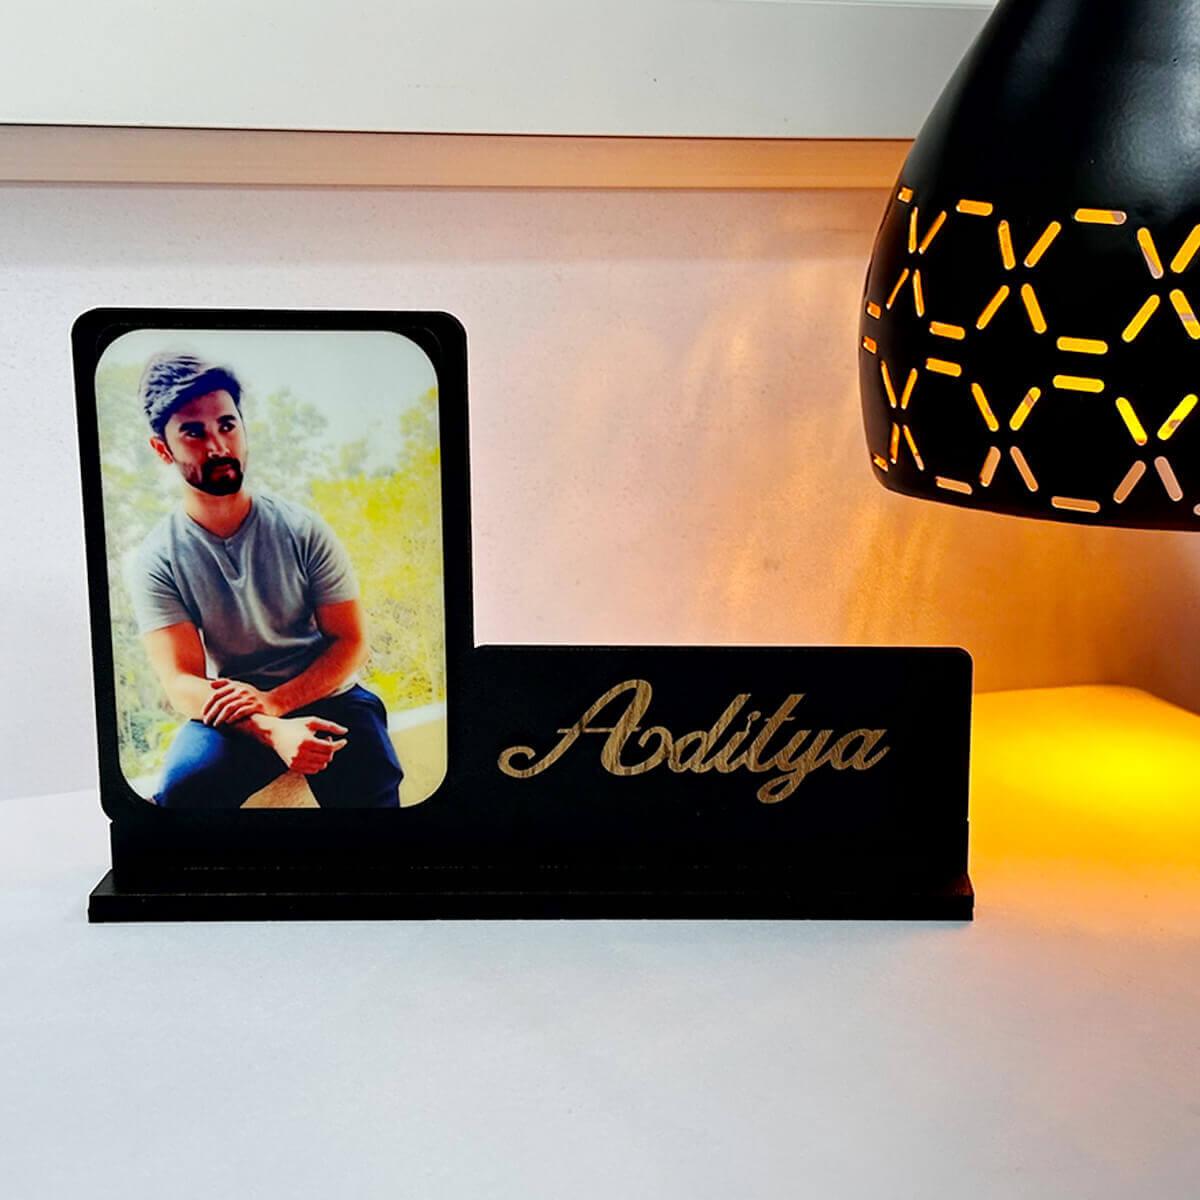 Stylish Table Top Photo Frame